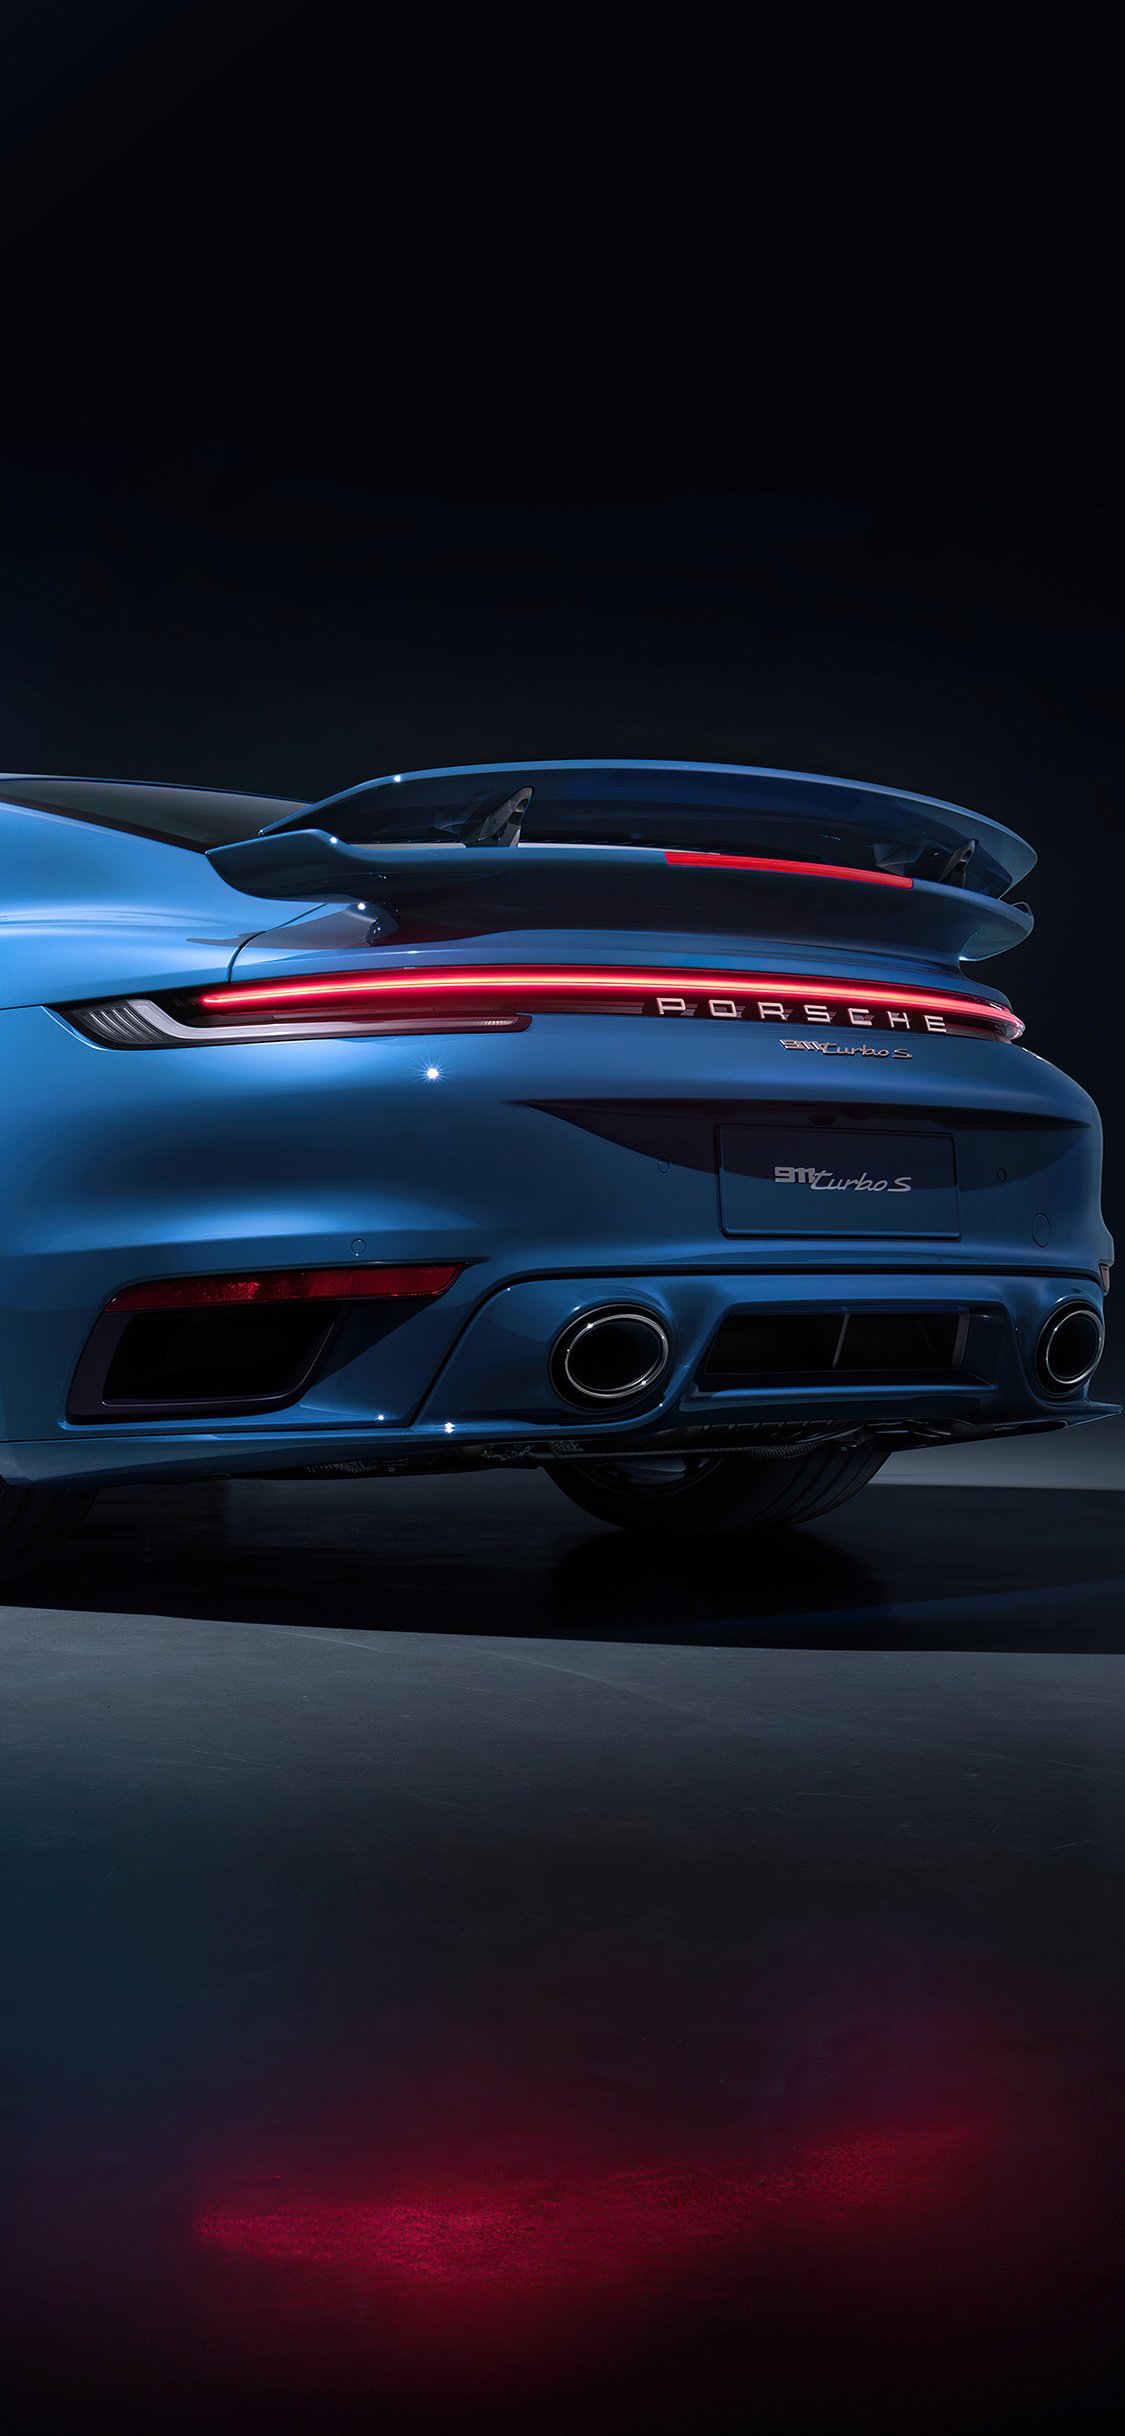 Porsche 911 Turbo S 2021 5k iPhone XS, iPhone iPhone X HD 4k Wallpaper, Image, Background, Photo and Picture